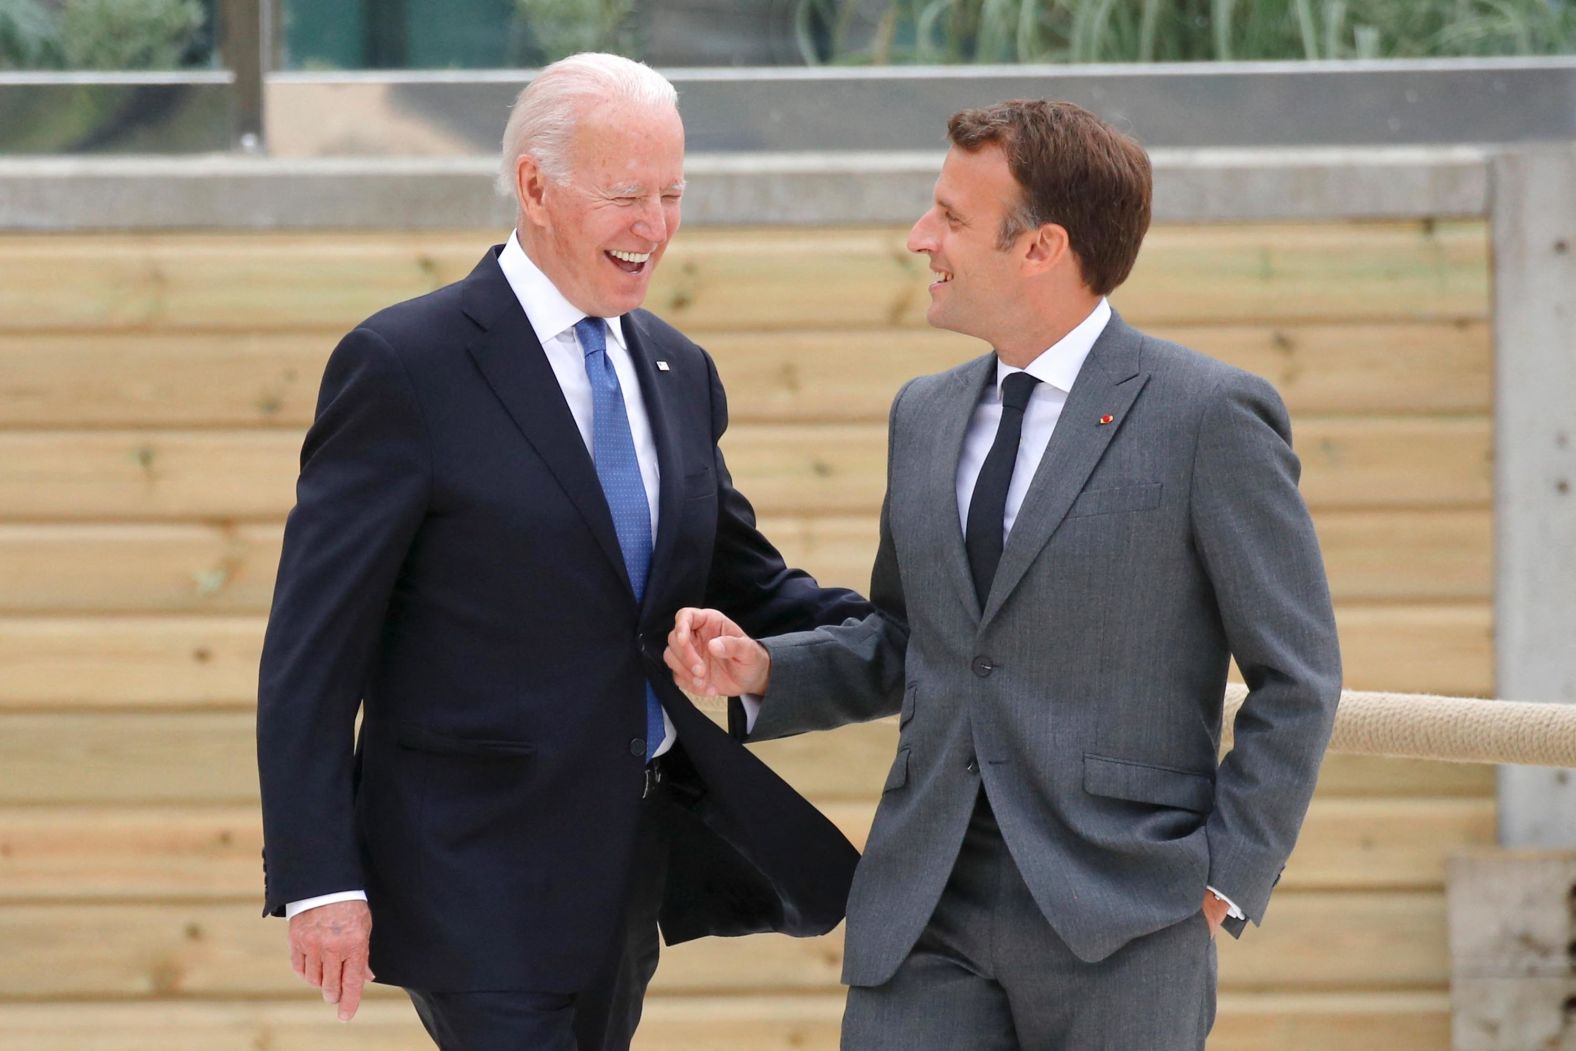 Biden and French President Emmanuel Macron walk along the boardwalk during the G7 summit on Friday. <a href="index.php?page=&url=https%3A%2F%2Fwww.cnn.com%2F2021%2F06%2F12%2Fpolitics%2Fbiden-macron-bilateral-g7%2Findex.html" target="_blank">They met for a more formal meeting on Saturday</a> and discussed a number of issues. "We have to deal with this pandemic and the Covid-19. We have to face a lot of challenges, a lot of crises, climate change, and for all these issues, what we need is cooperation, and I think it's great to have a US President part of the club and very willing to cooperate," Macron said.